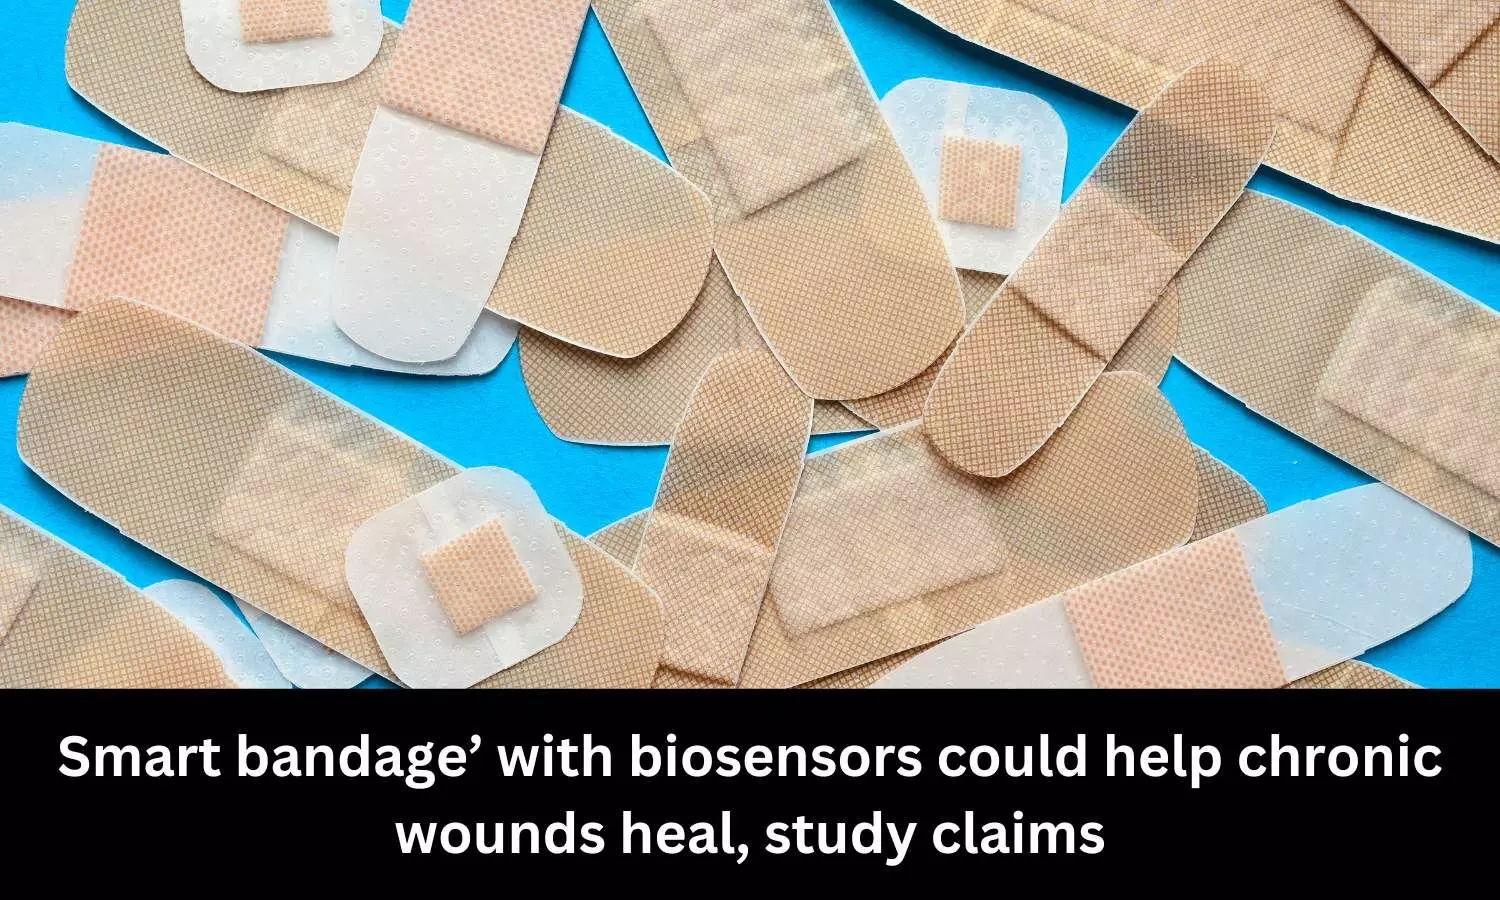 Smart bandage with biosensors could help chronic wounds heal: Study